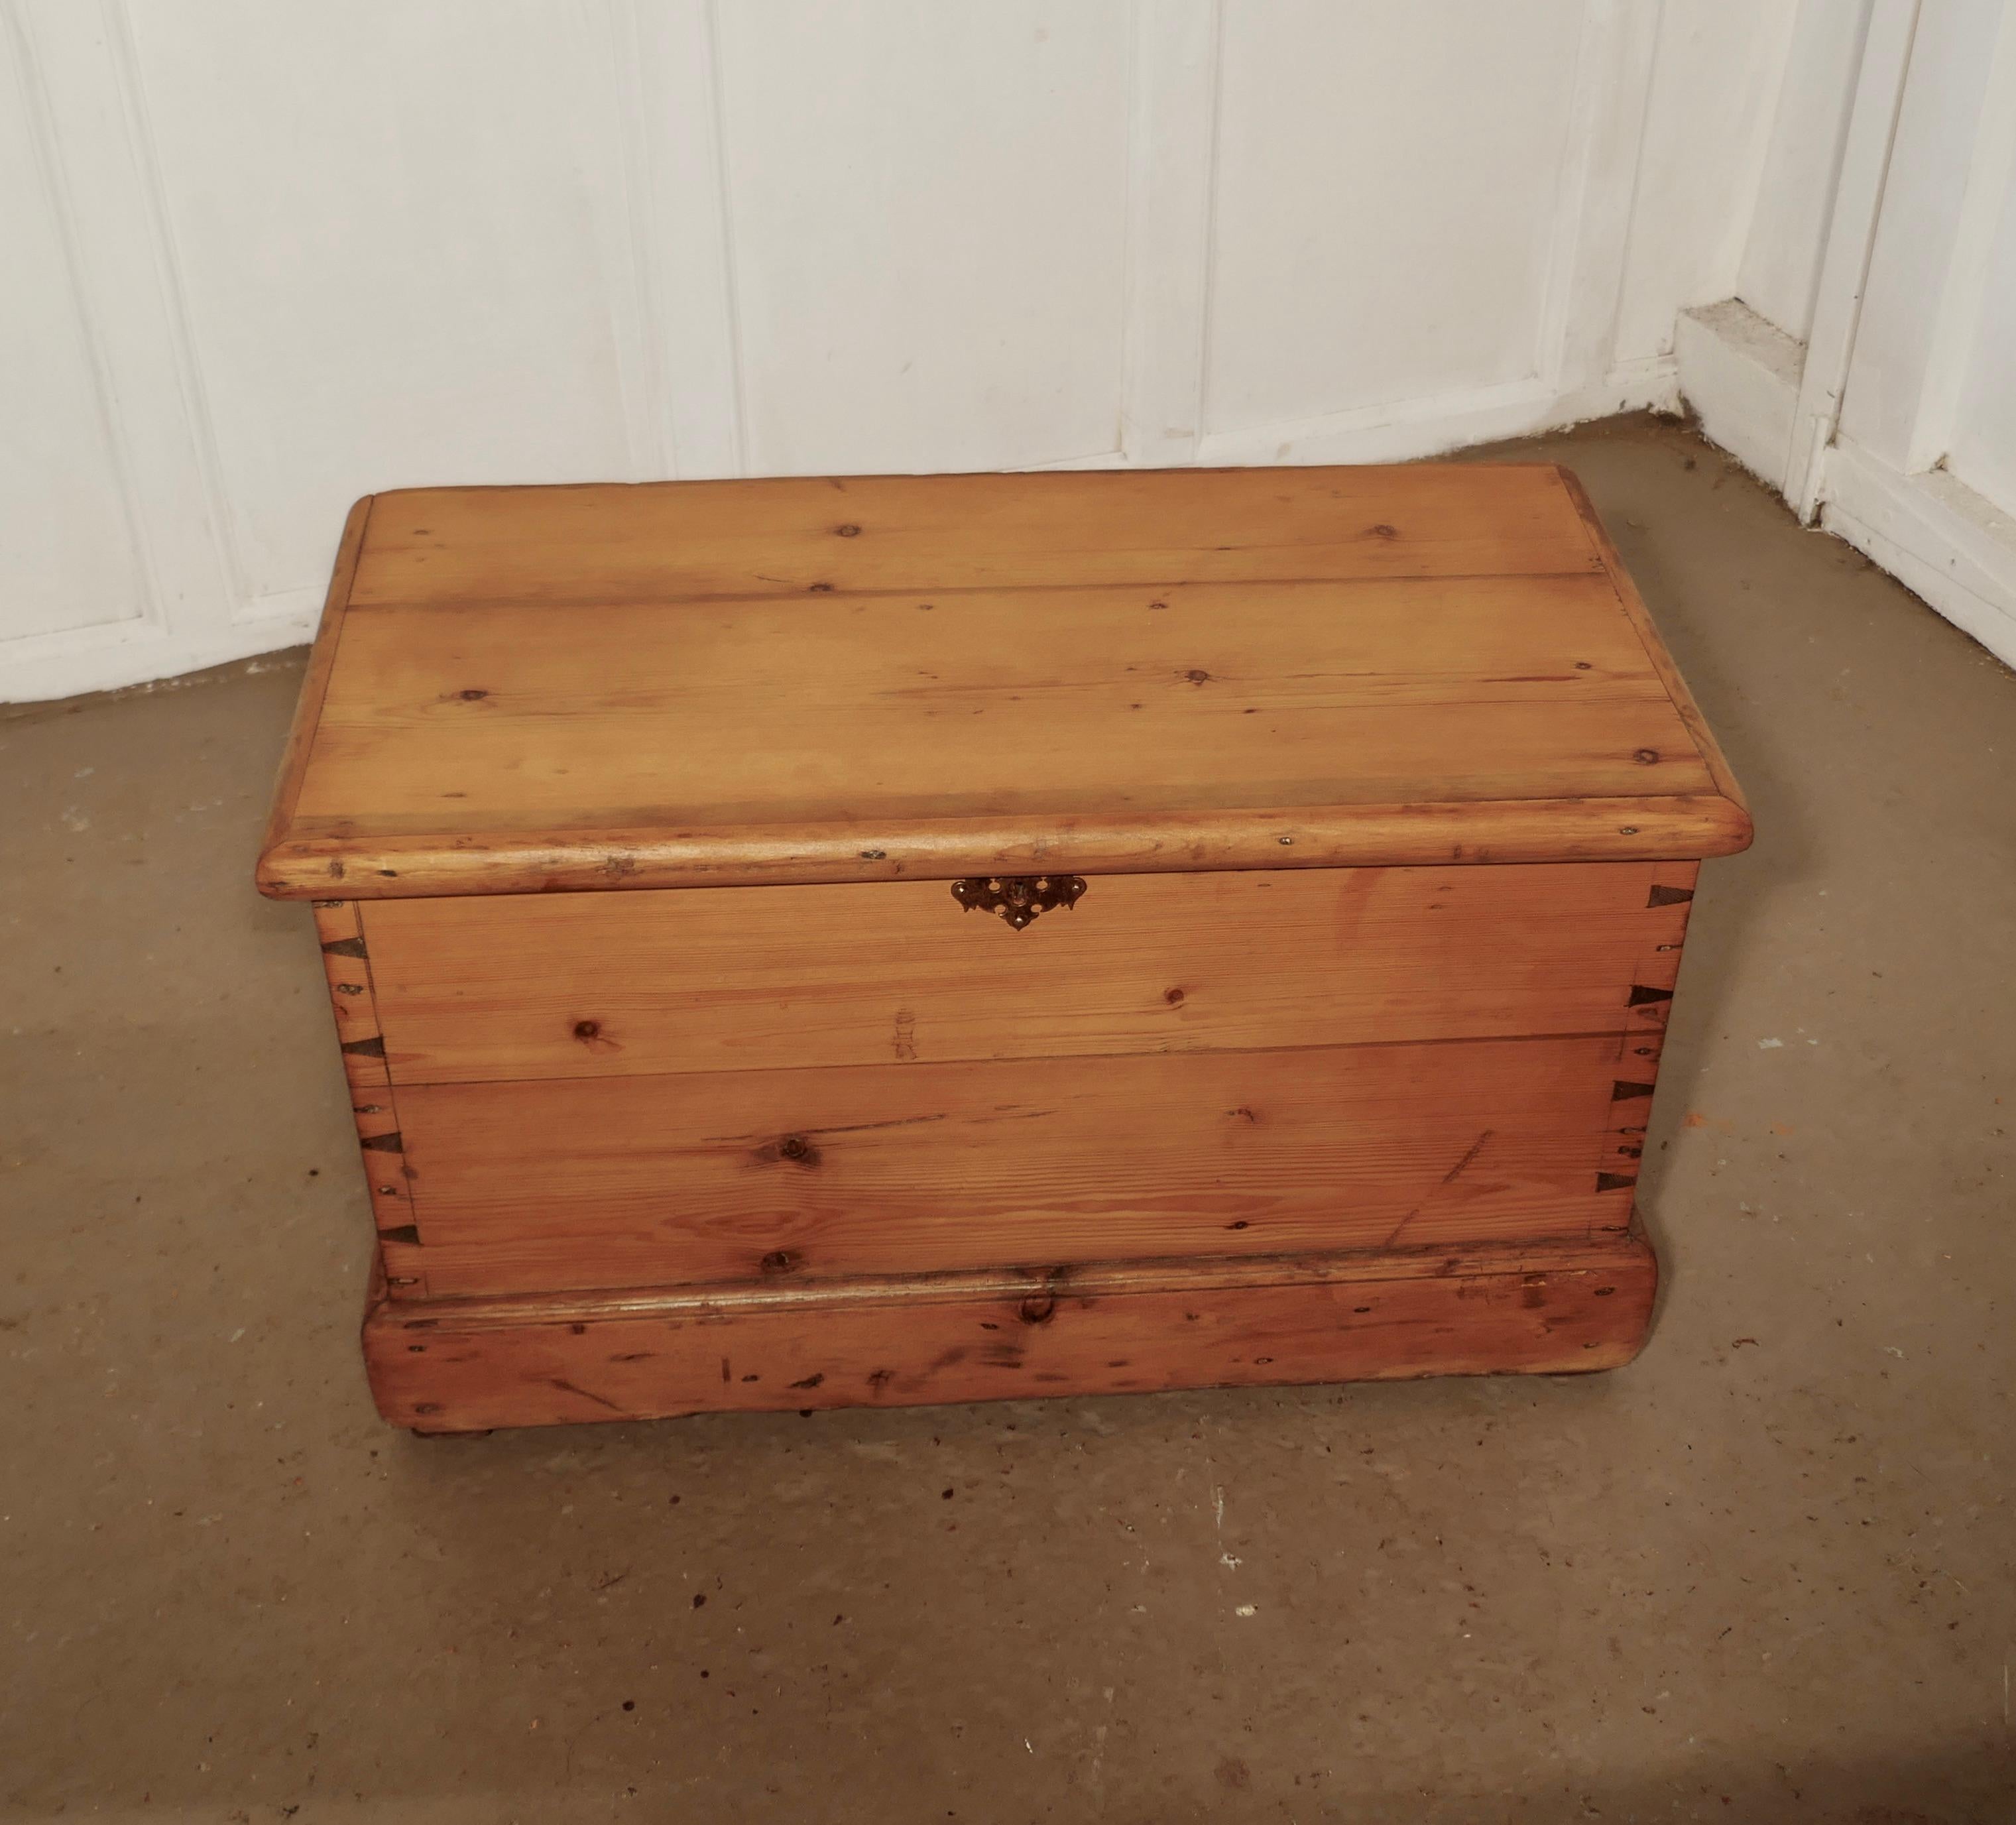 Early Victorian pine chest, blanket box or coffee table


This is a very good heavy quality box made in 1” thick pine, it has an open candle box with a secret drawer concealed behind a sliding panel, blacksmith made iron strap hinges and carrying